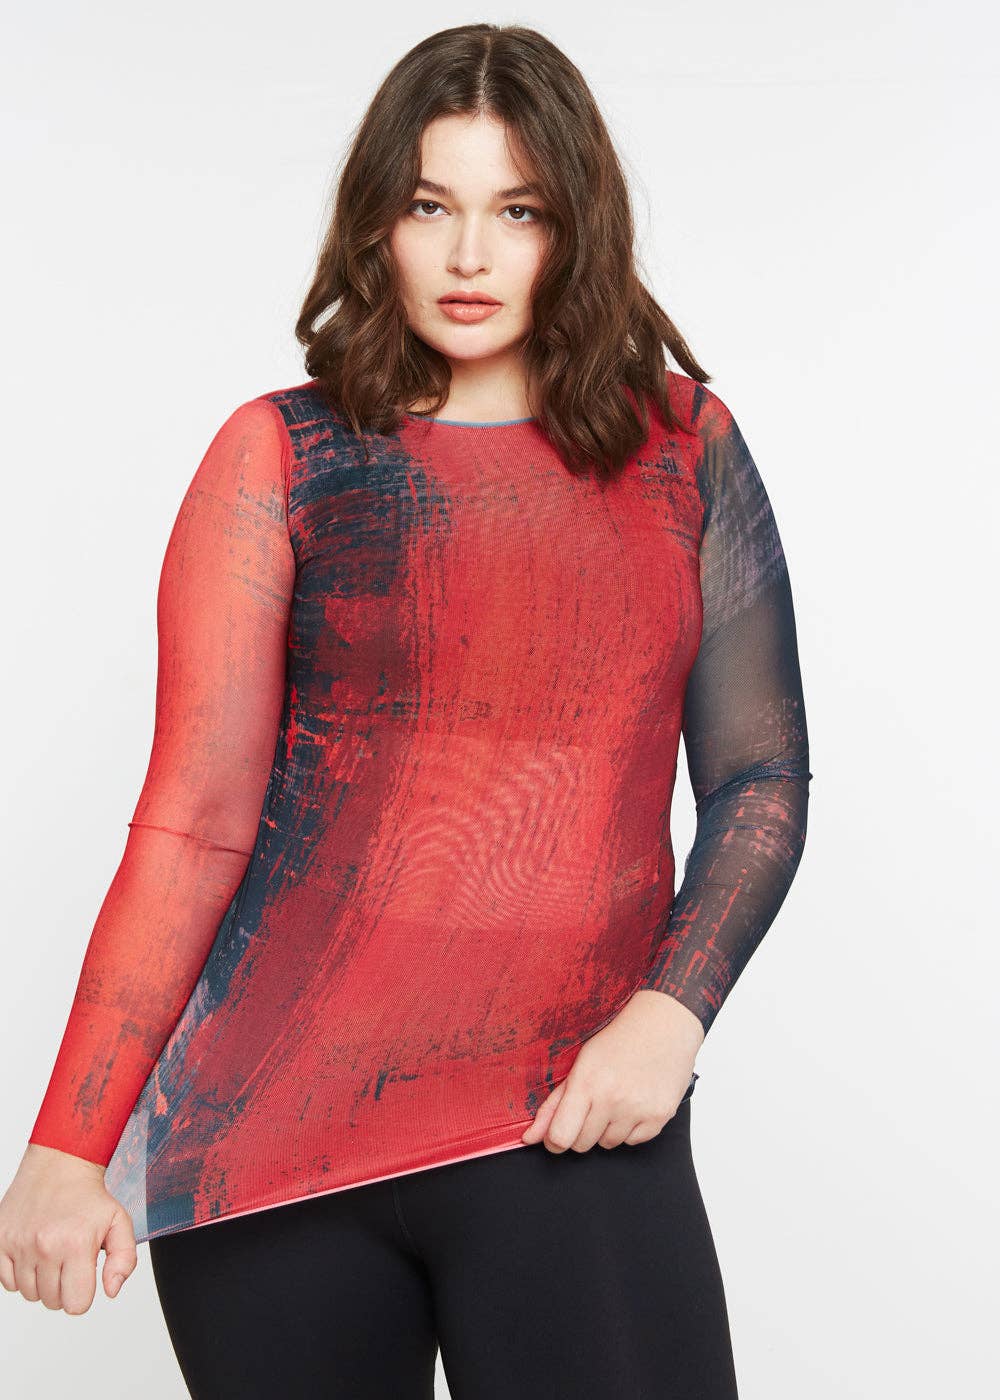 AMB Designs - Vermillion - Florence Double Sheer Top